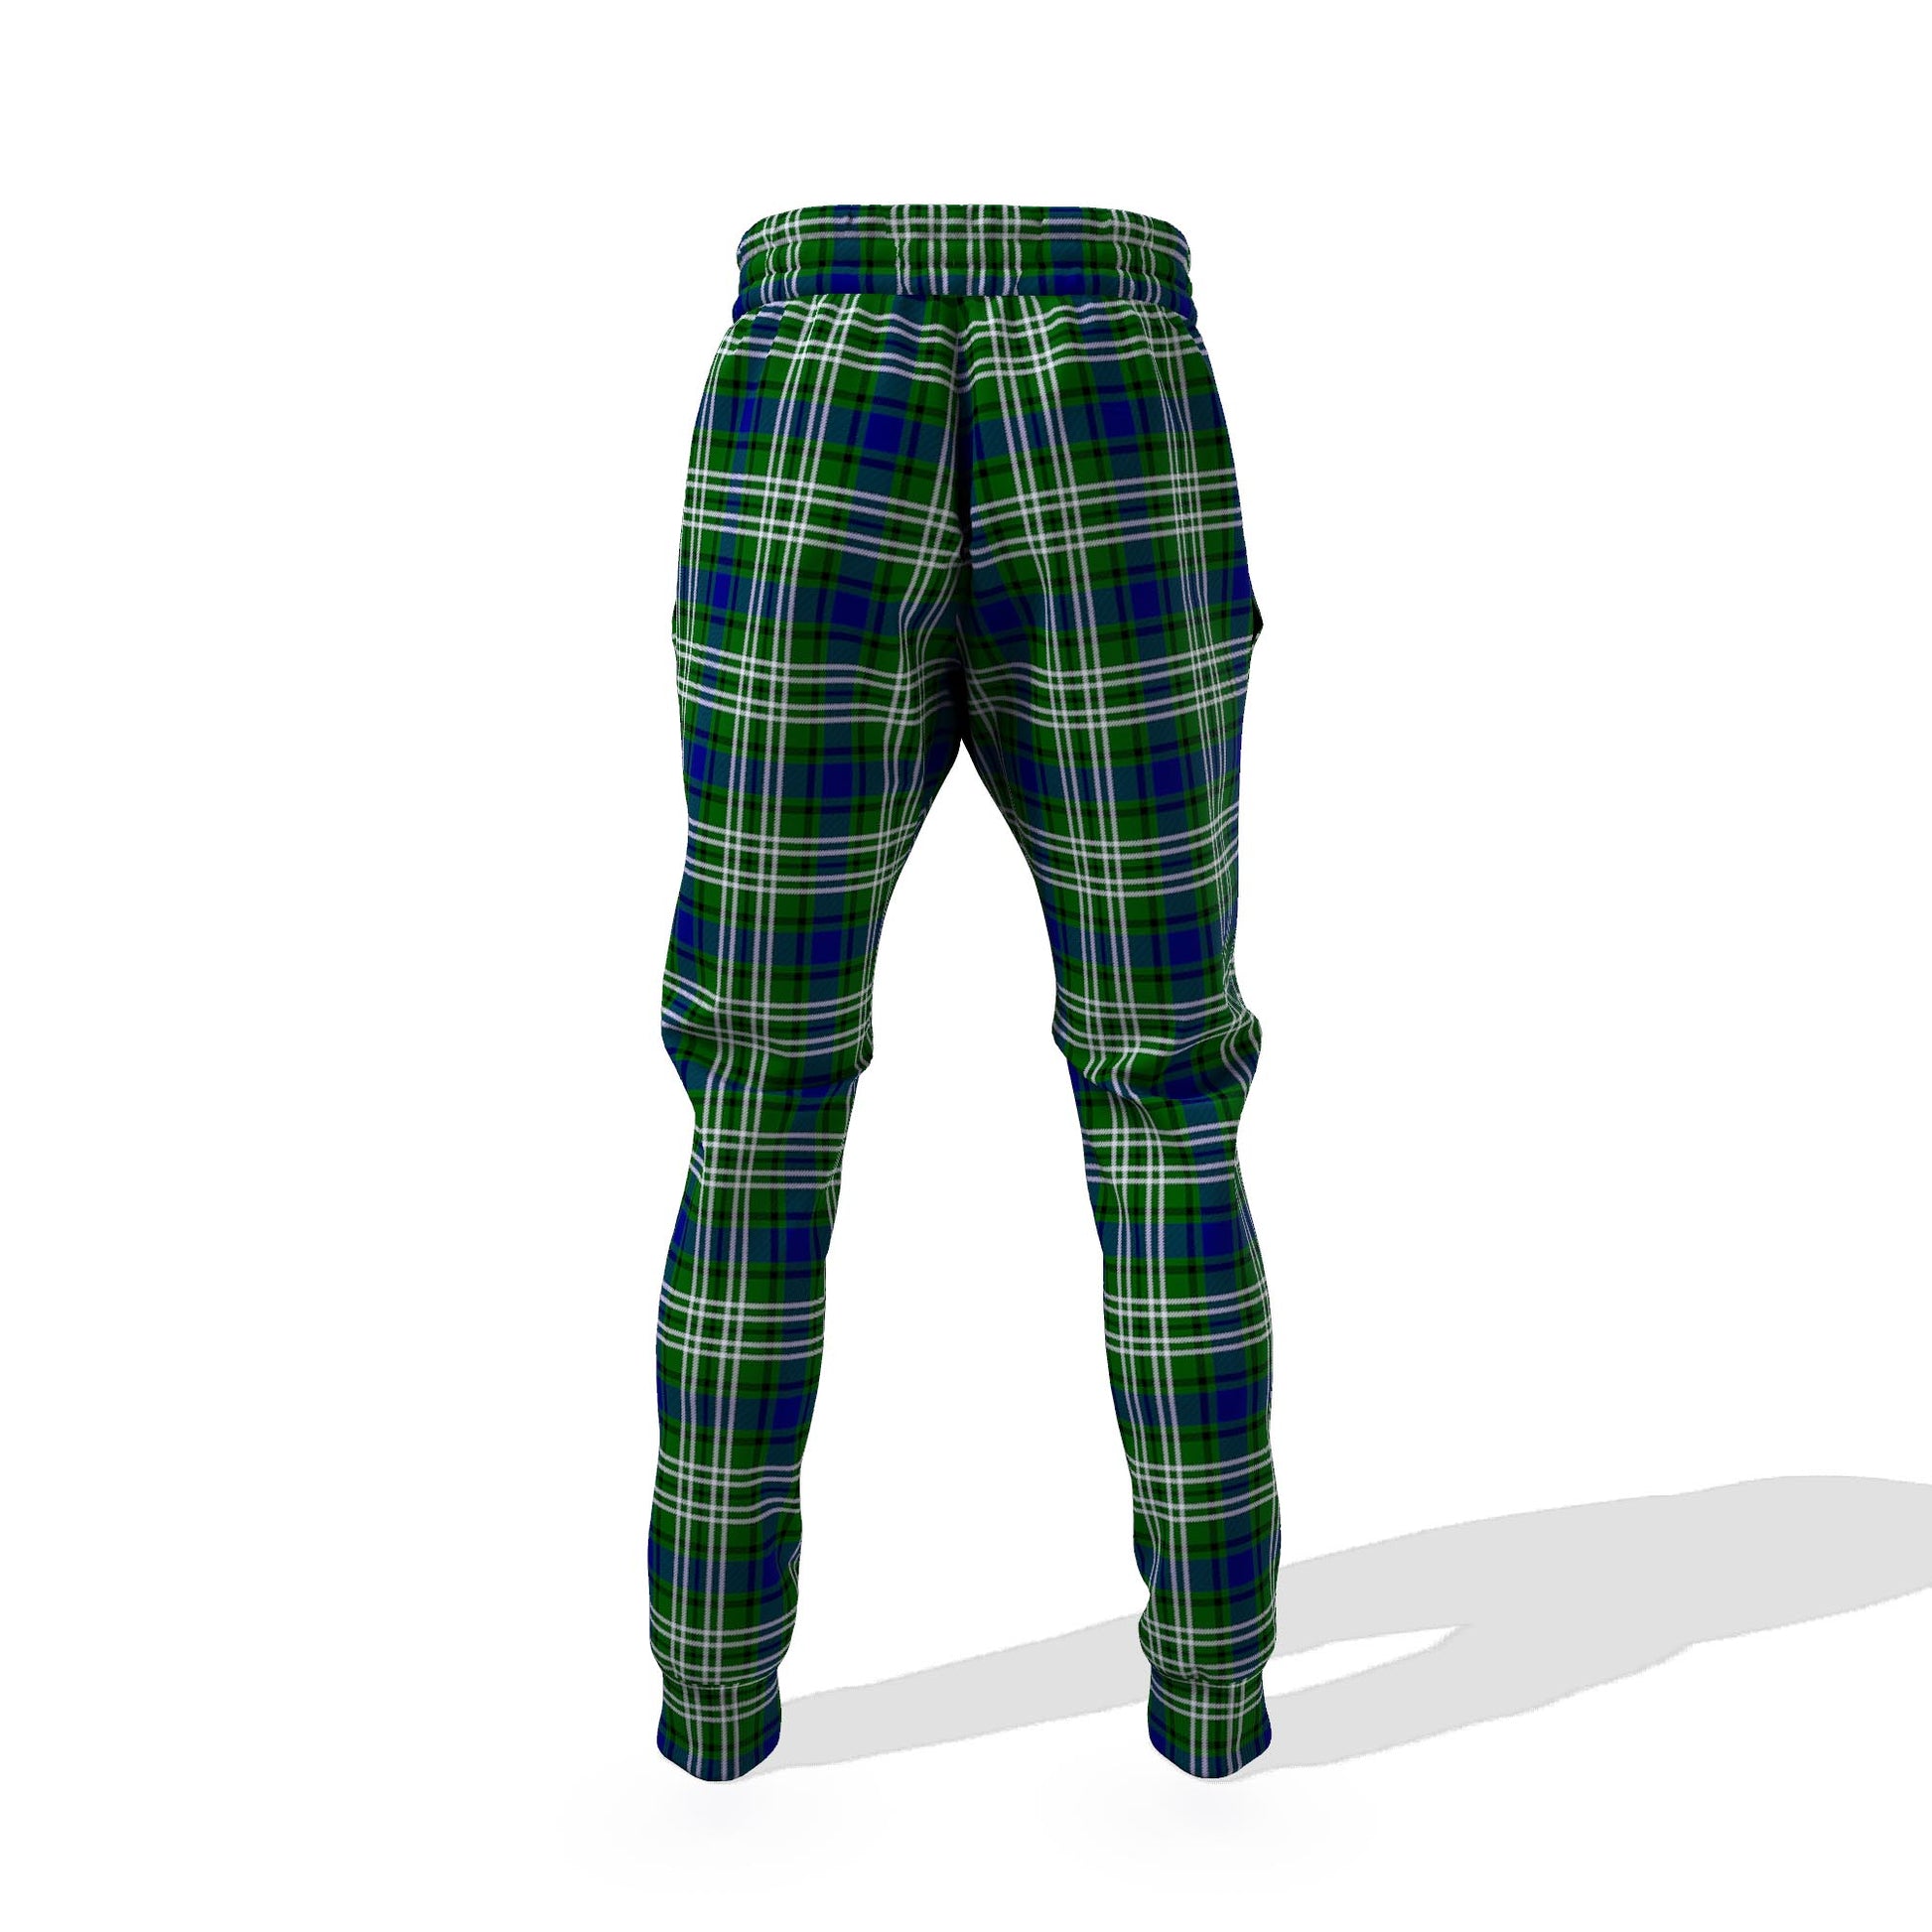 Learmonth Tartan Joggers Pants with Family Crest - Tartanvibesclothing